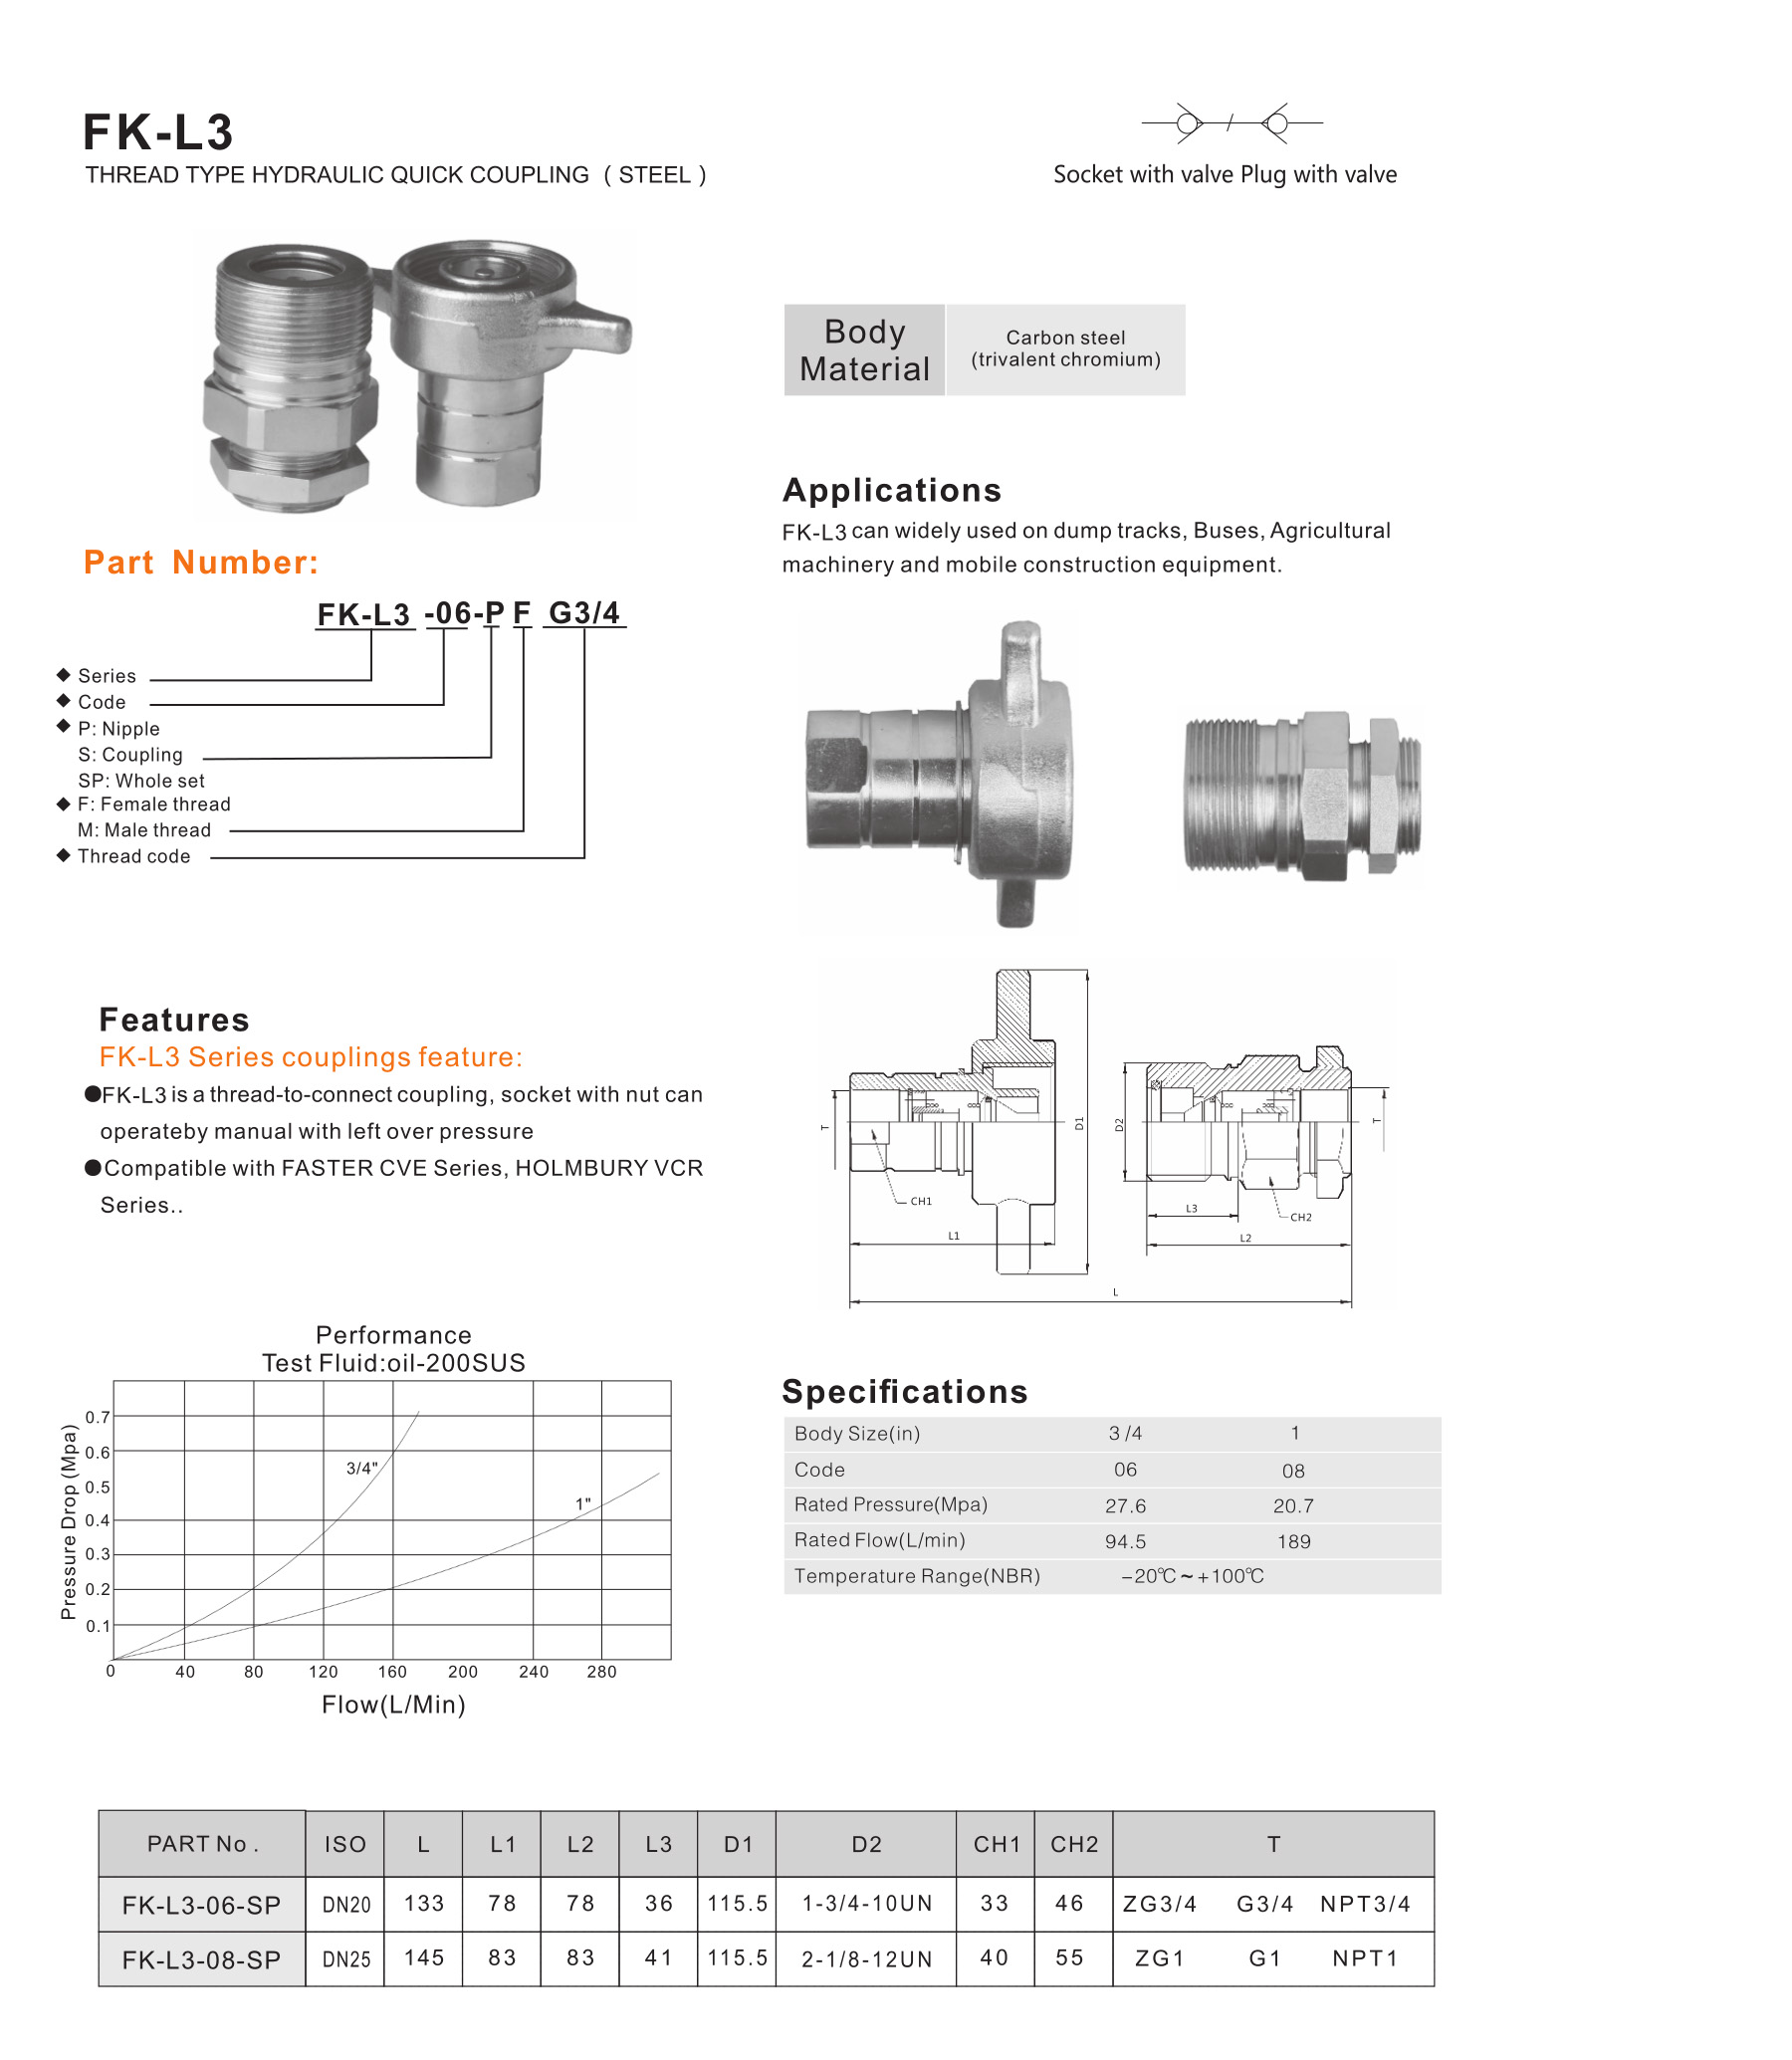 FK-L3 Series thread type hydraulic quick coupling